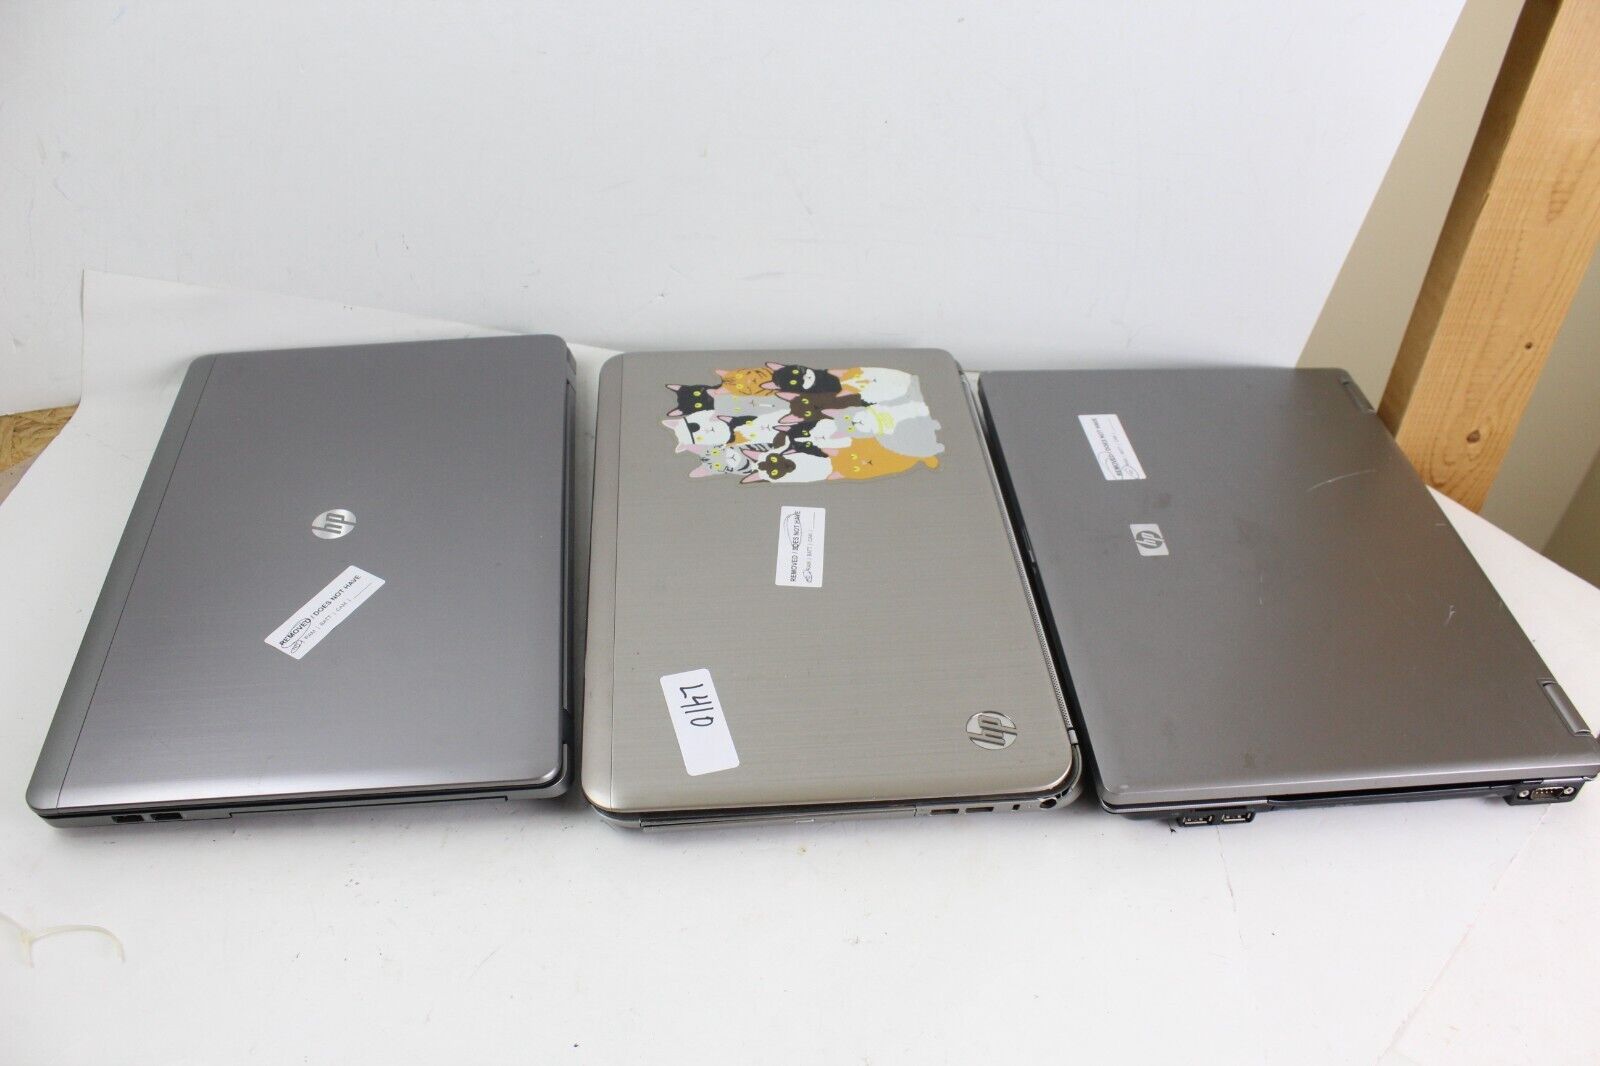 AS IS PARTS Lot of 3 HP Laptops i5 AMD SPECS UNKNOWN NO HDD